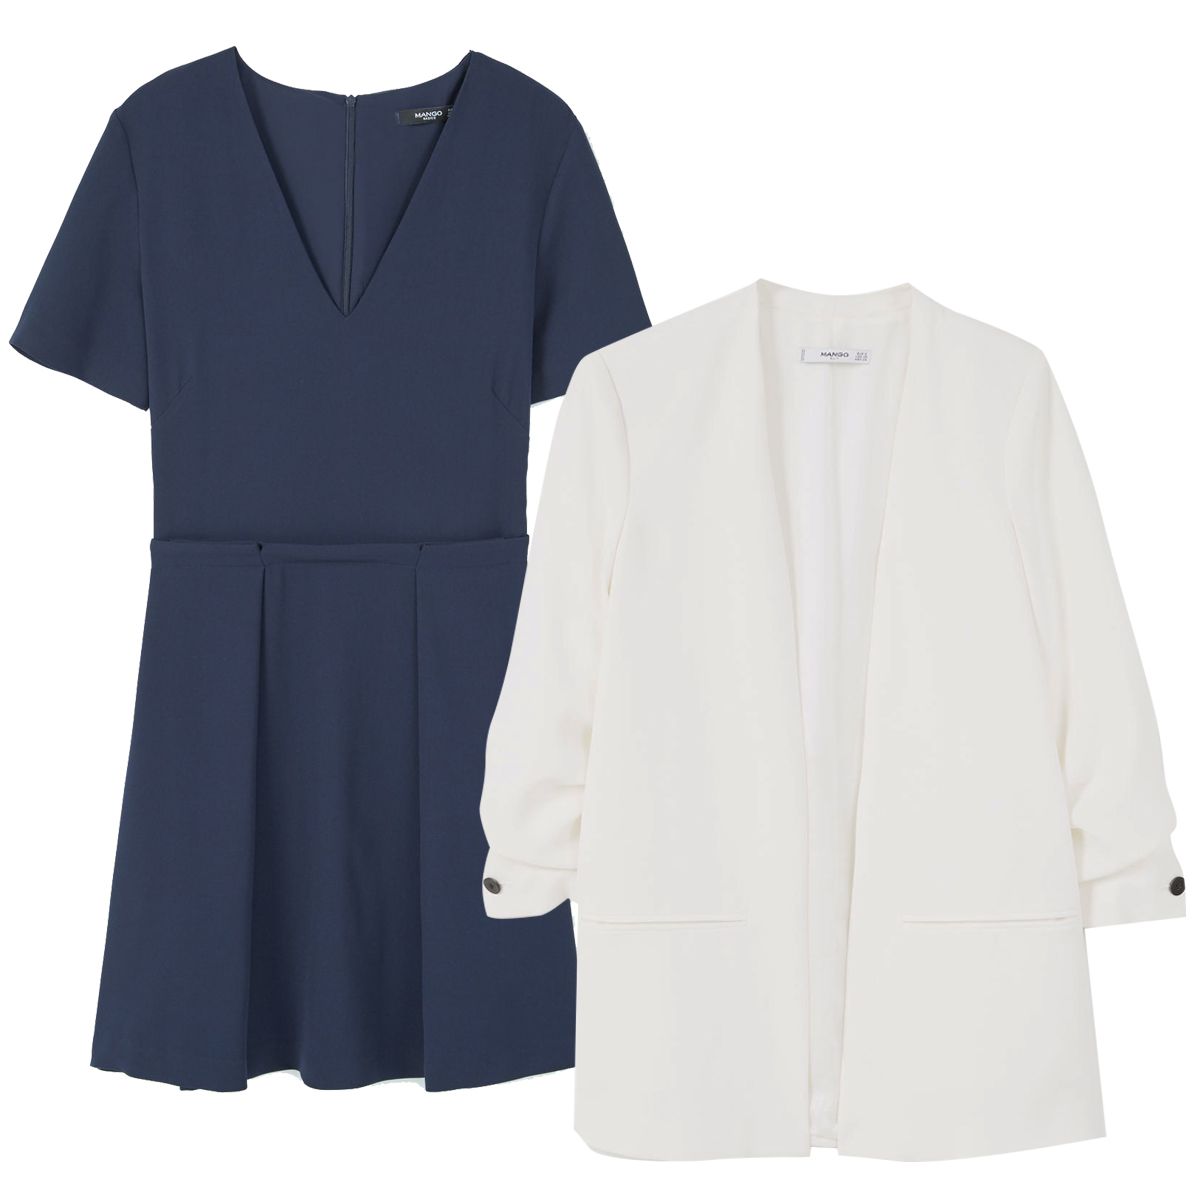 Try a simple navy dress with a white blazer